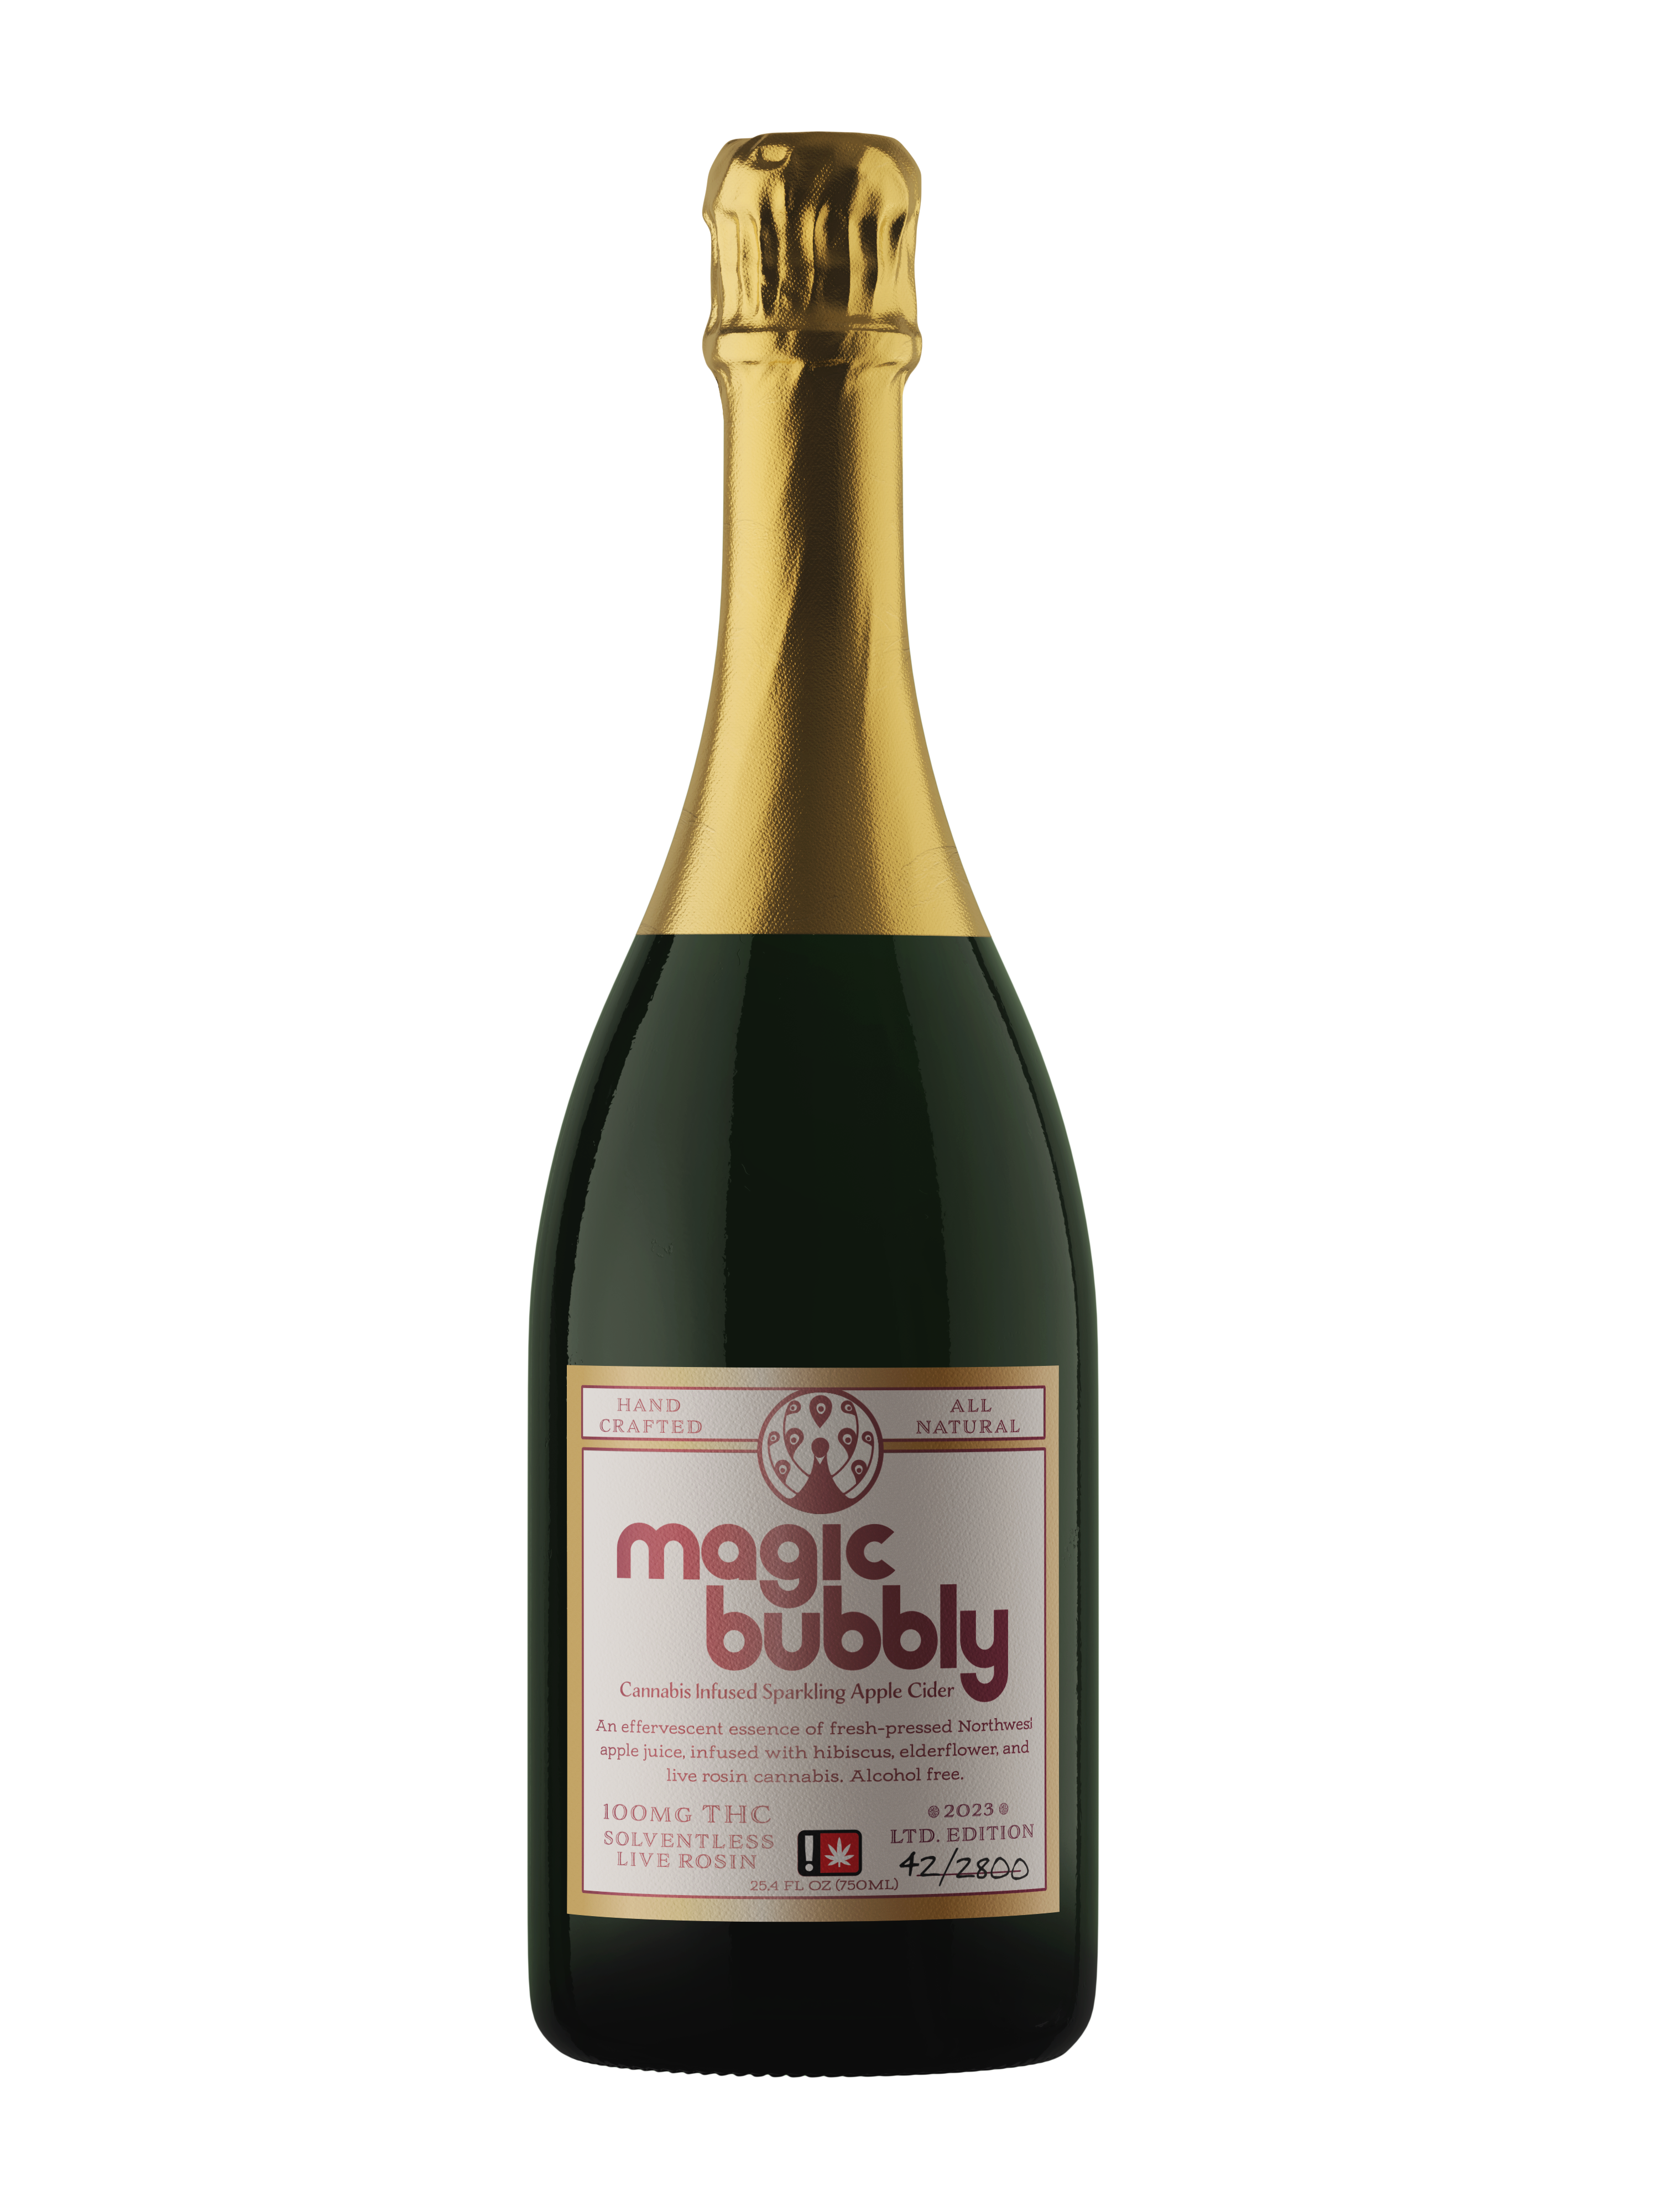 Unprecedented Champagne-Style Sparkling Cider Infused with 100mg Solventess Live Rosin